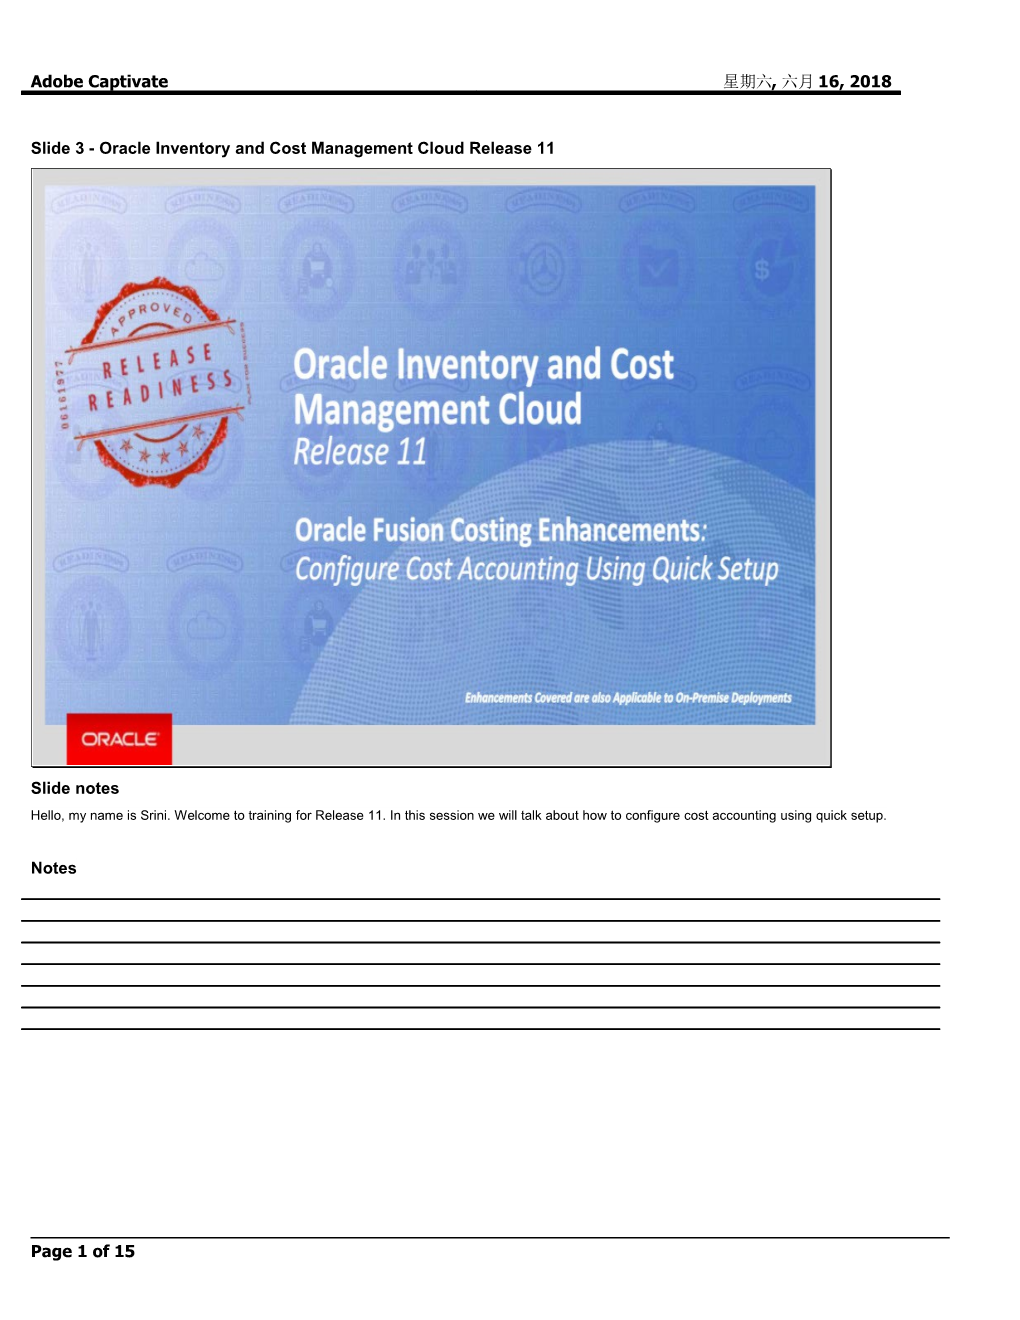 Slide 3 - Oracle Inventory and Cost Management Cloud Release 11